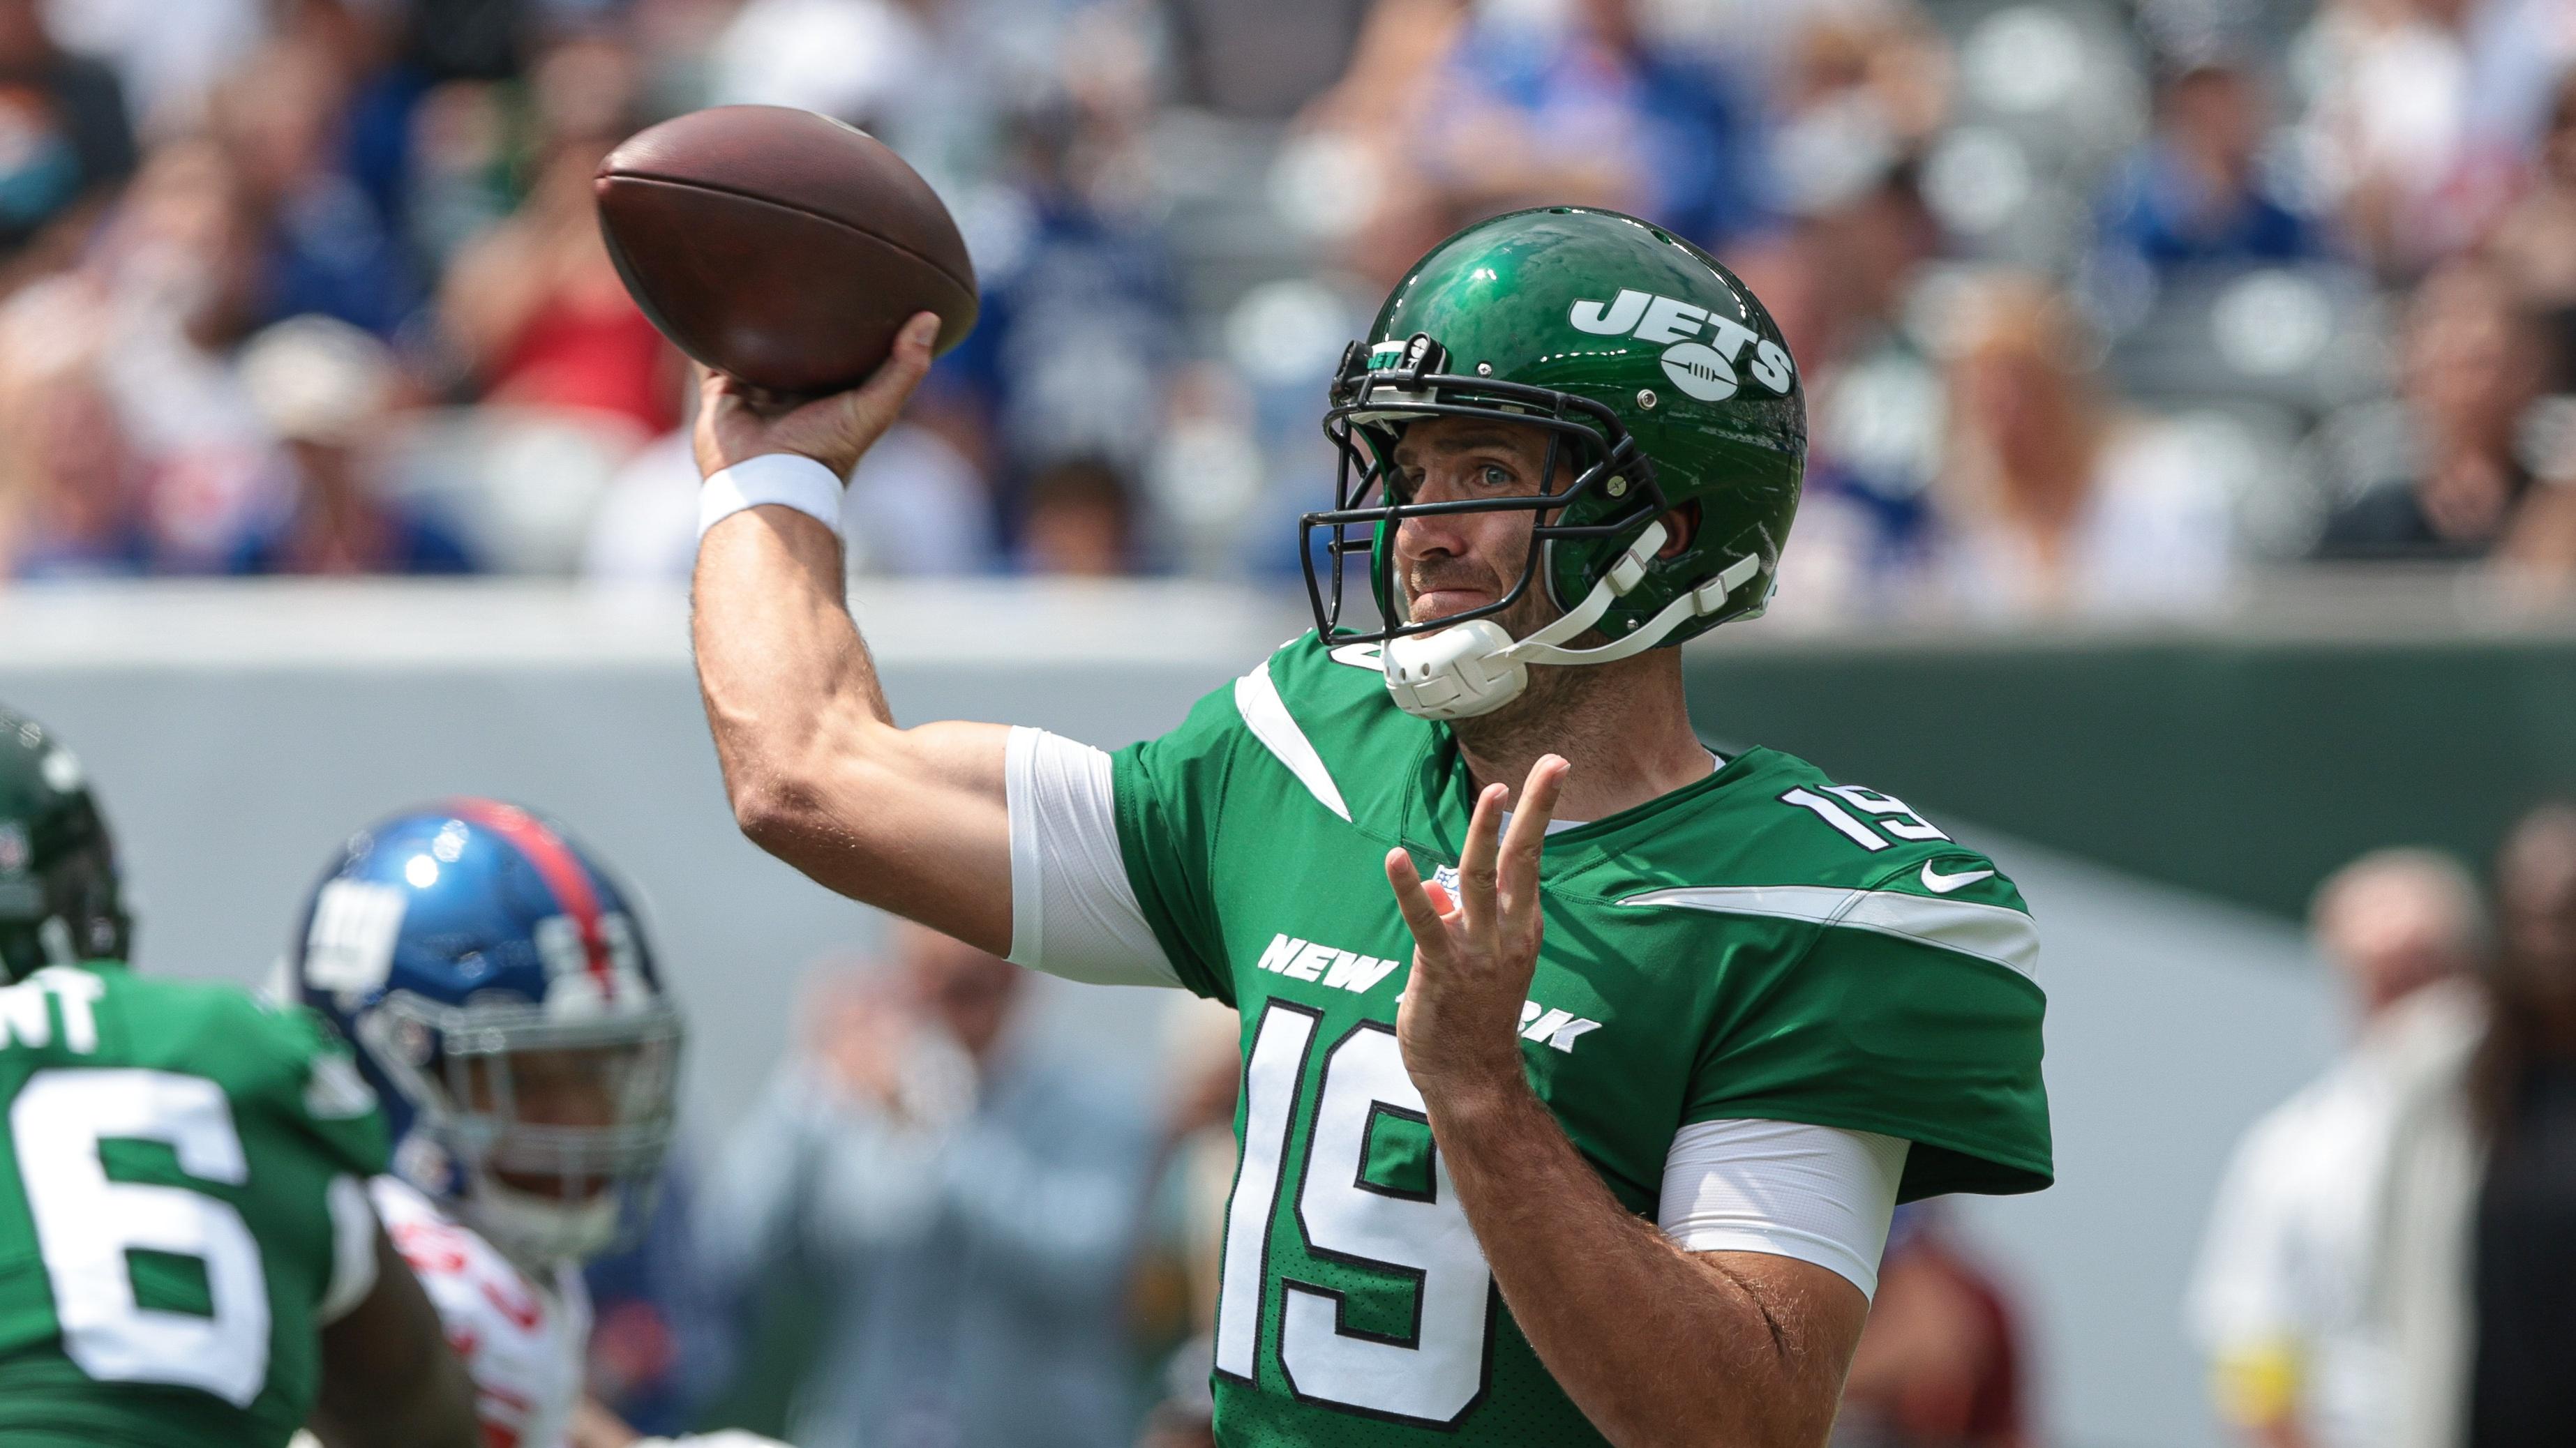 Aug 28, 2022; East Rutherford, New Jersey, USA; New York Jets quarterback Joe Flacco (19) throws the ball during the first half against the New York Giants at MetLife Stadium. Mandatory Credit: Vincent Carchietta-USA TODAY Sports / © Vincent Carchietta-USA TODAY Sports